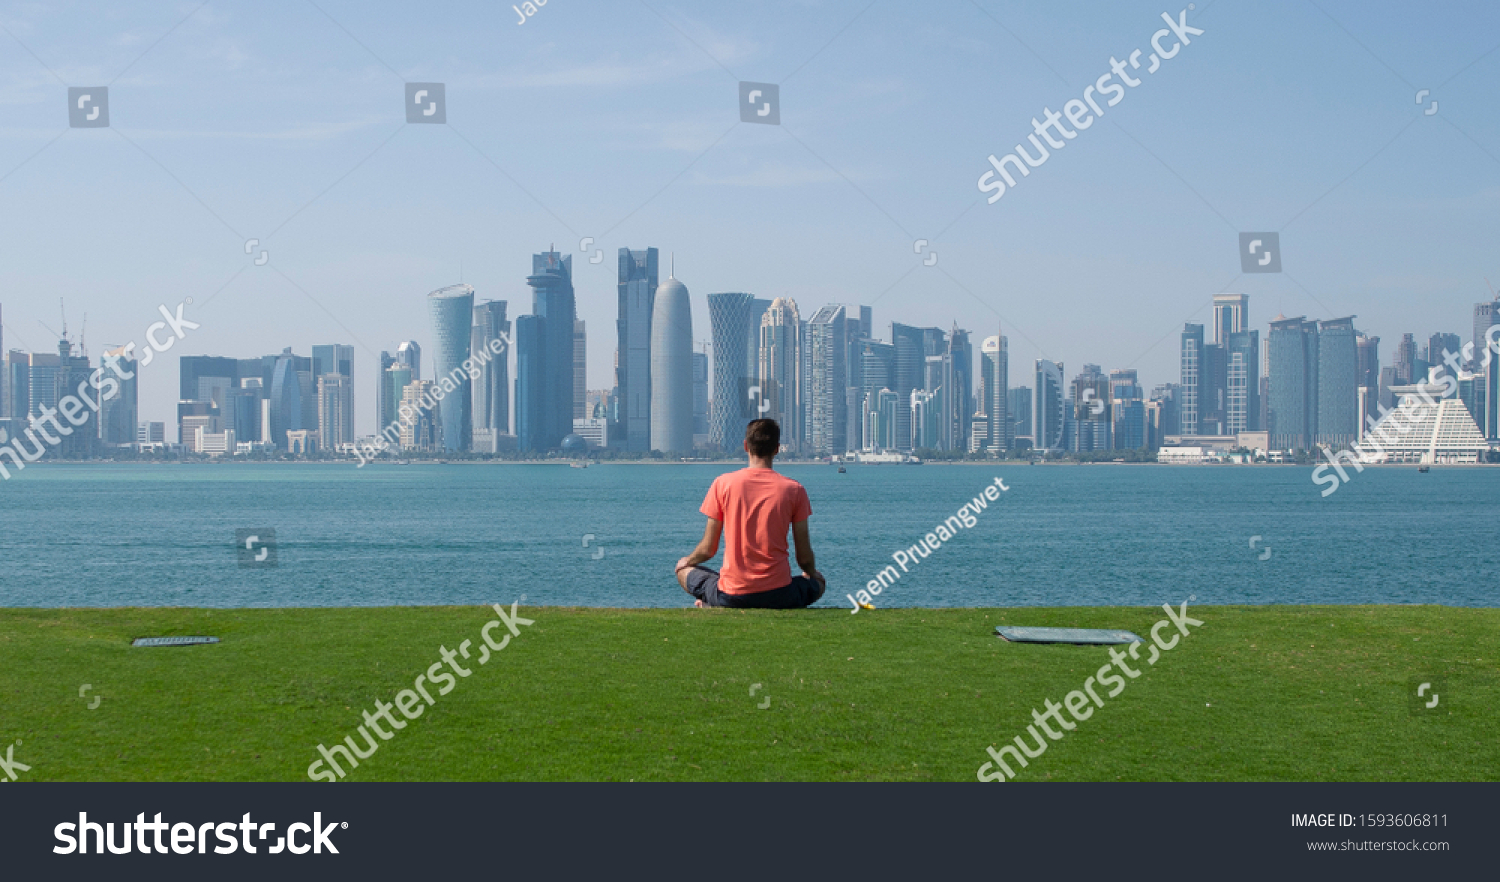 A man meditates and relaxes on the hill of the MIA park in Doha Qatar over looking the city skyline #1593606811